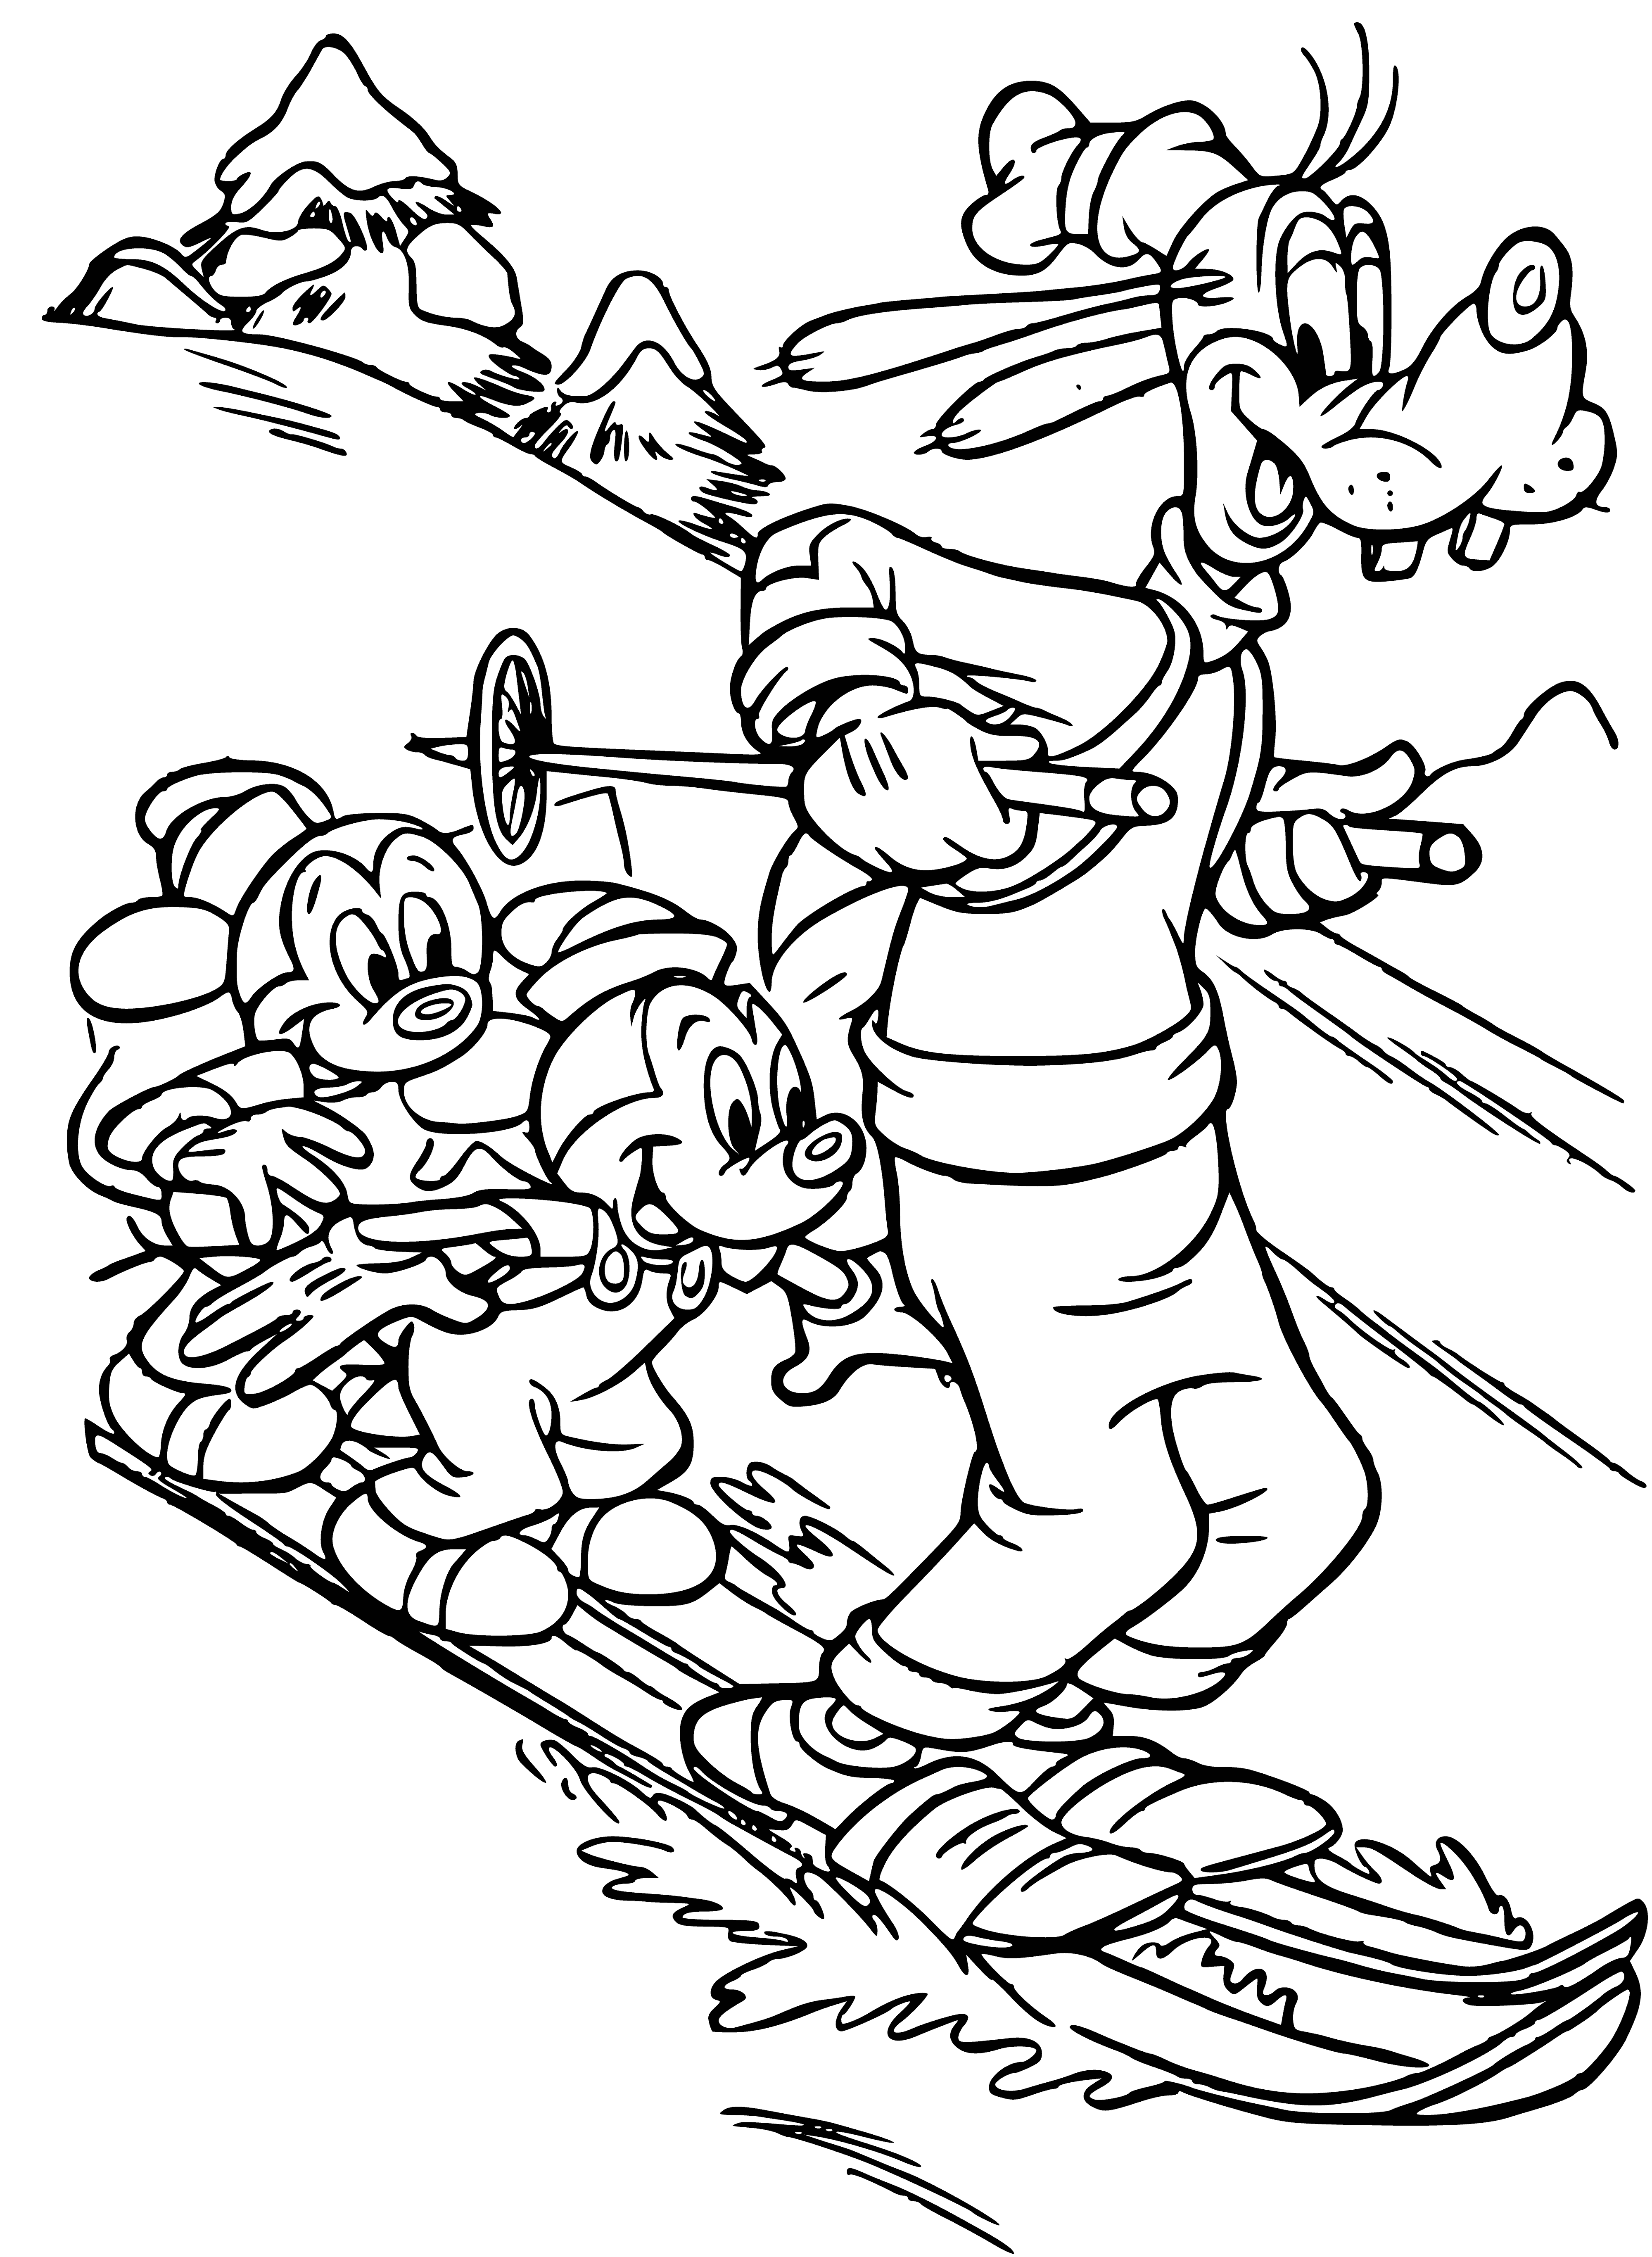 coloring page: Mickey Mouse runs around on all fours with Goofy cheering him on, while a group of mice cheers them both.